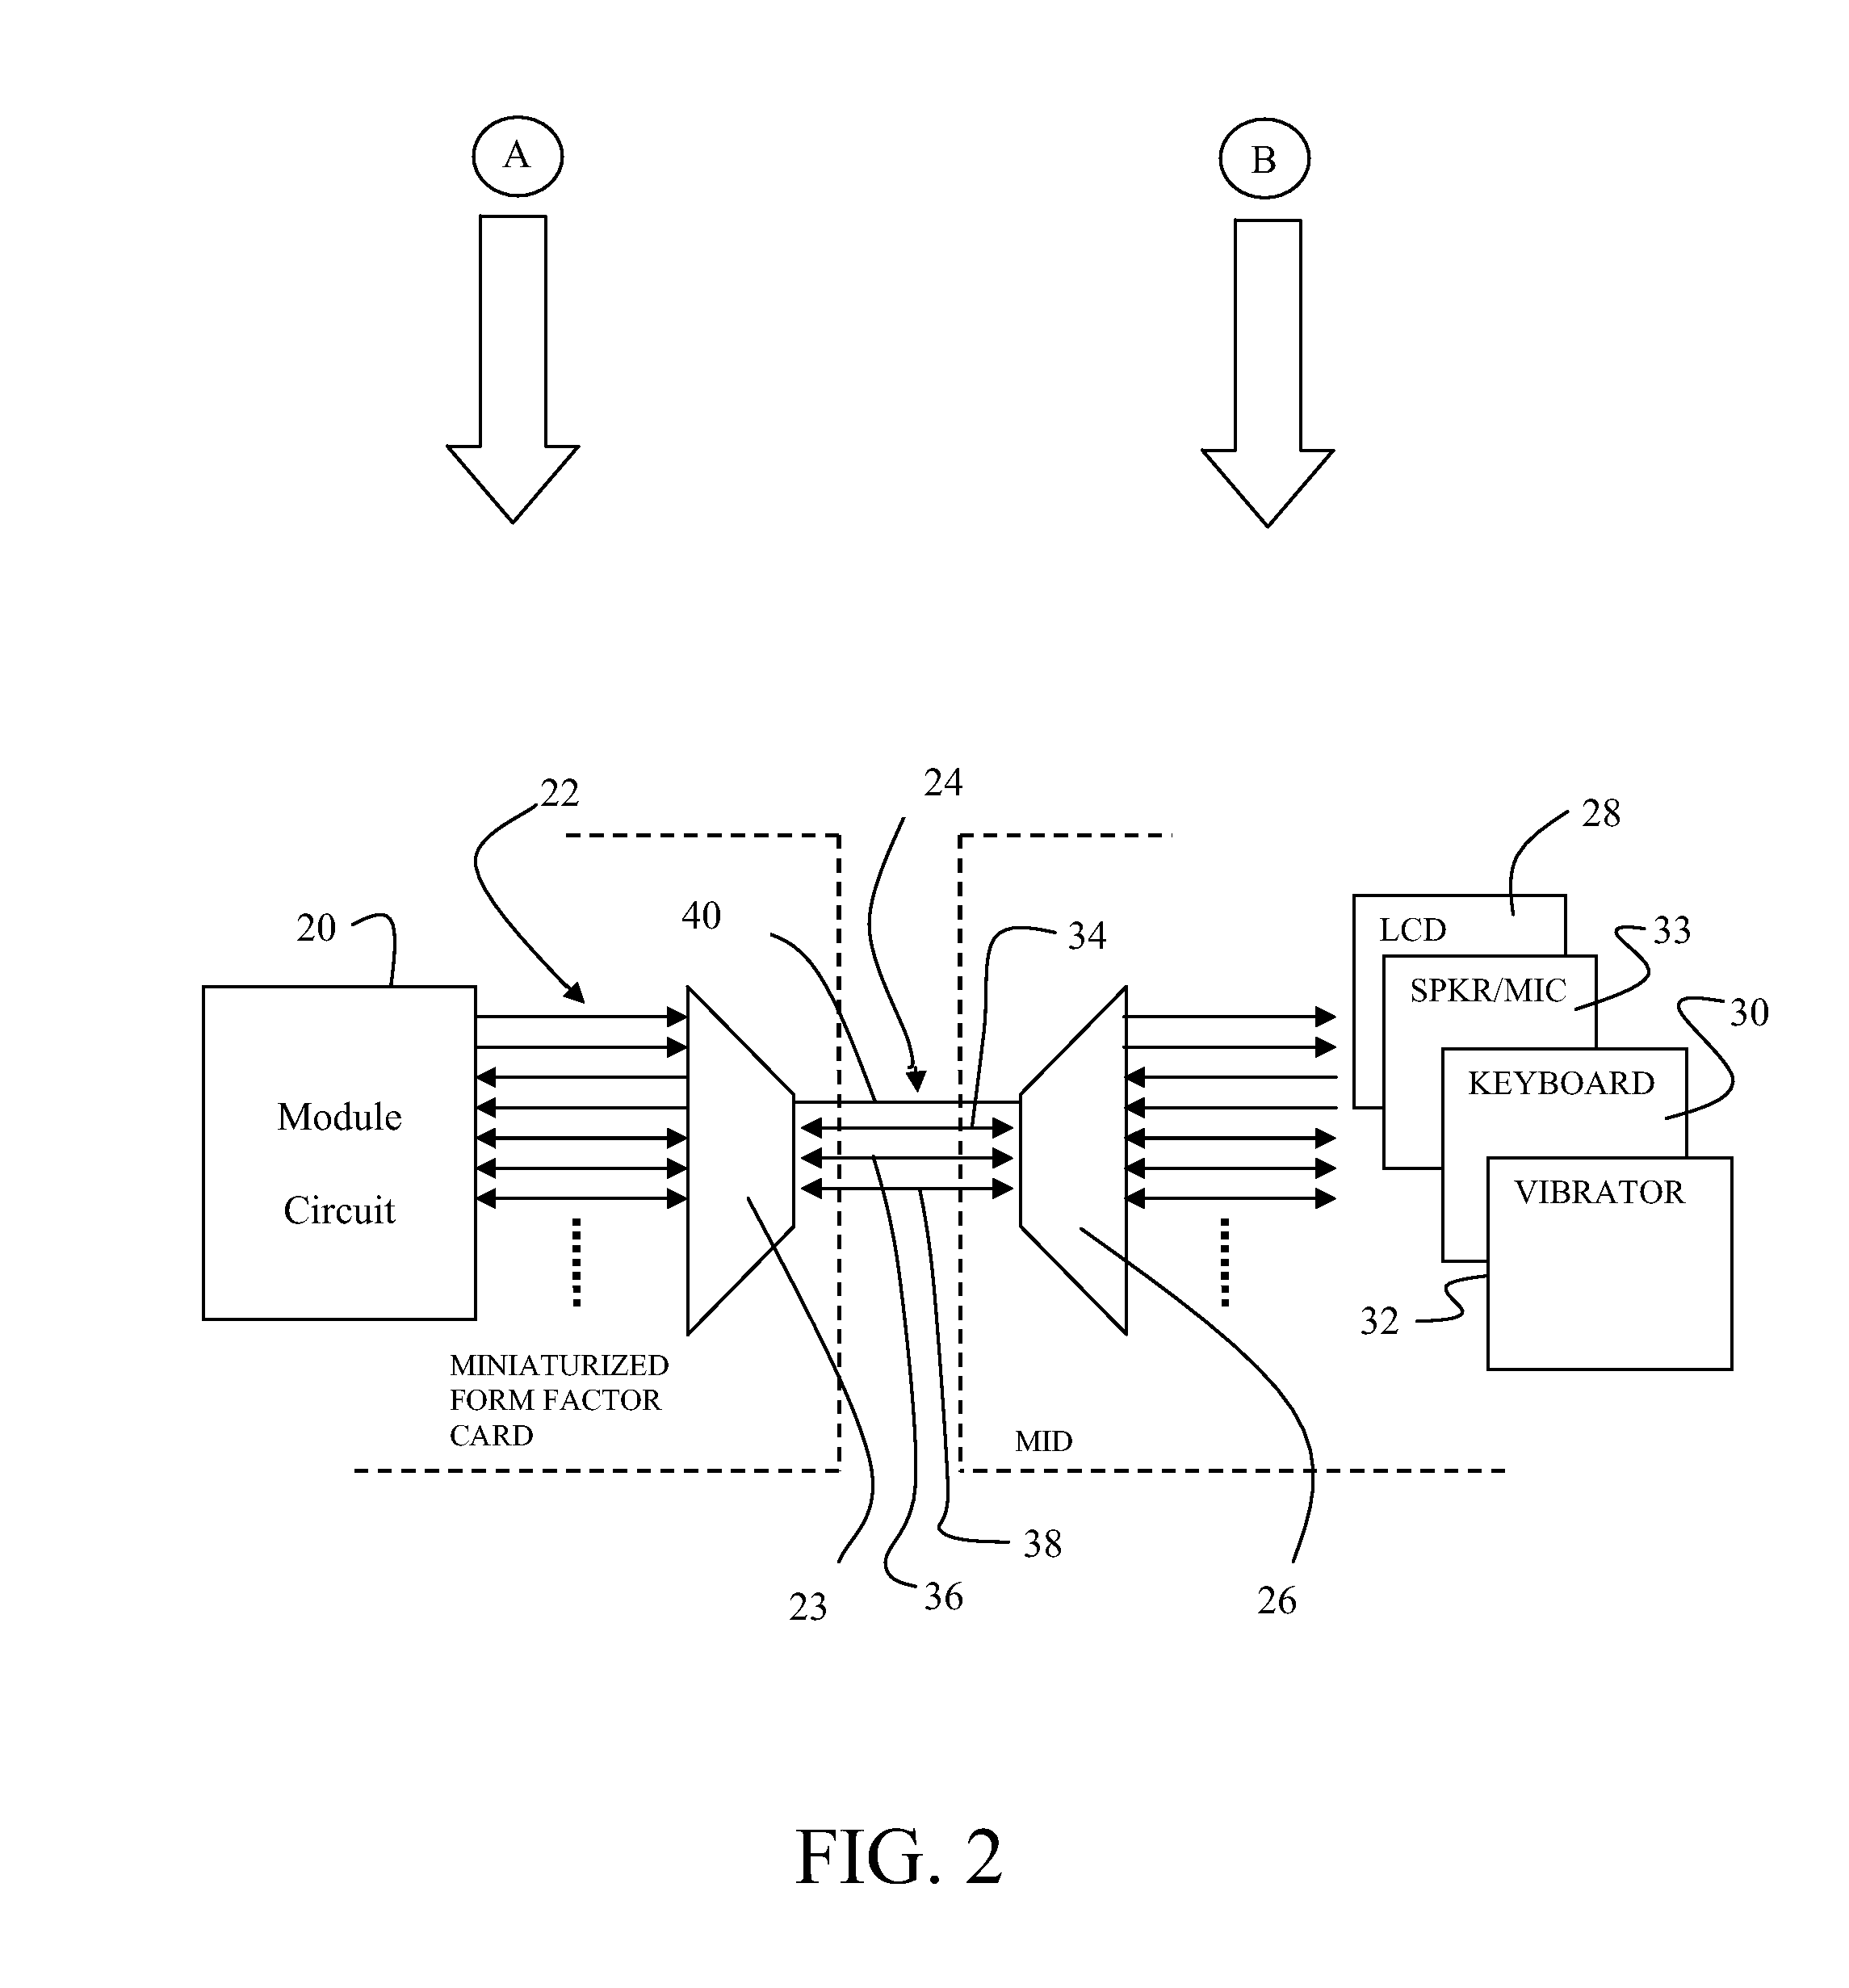 Method and apparatus for reducing pin count for connection of a miniaturized form factor card in a mobile information device